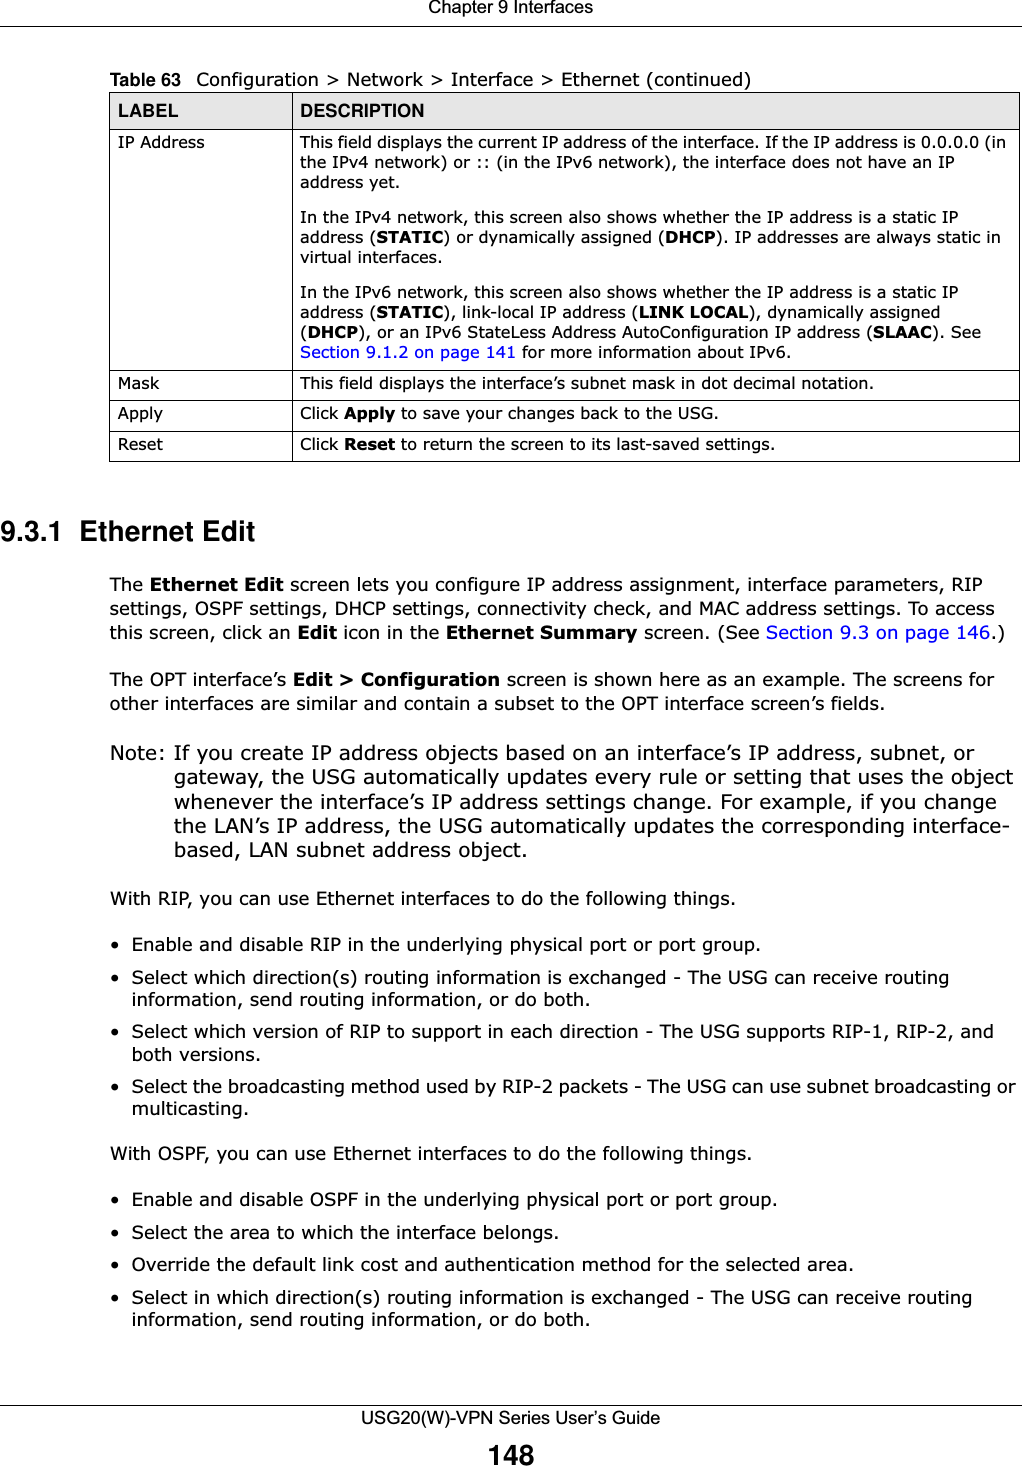 Chapter 9 InterfacesUSG20(W)-VPN Series User’s Guide1489.3.1  Ethernet Edit The Ethernet Edit screen lets you configure IP address assignment, interface parameters, RIP settings, OSPF settings, DHCP settings, connectivity check, and MAC address settings. To access this screen, click an Edit icon in the Ethernet Summary screen. (See Section 9.3 on page 146.)The OPT interface’s Edit &gt; Configuration screen is shown here as an example. The screens for other interfaces are similar and contain a subset to the OPT interface screen’s fields. Note: If you create IP address objects based on an interface’s IP address, subnet, or gateway, the USG automatically updates every rule or setting that uses the object whenever the interface’s IP address settings change. For example, if you change the LAN’s IP address, the USG automatically updates the corresponding interface-based, LAN subnet address object.With RIP, you can use Ethernet interfaces to do the following things.• Enable and disable RIP in the underlying physical port or port group.• Select which direction(s) routing information is exchanged - The USG can receive routing information, send routing information, or do both.• Select which version of RIP to support in each direction - The USG supports RIP-1, RIP-2, and both versions.• Select the broadcasting method used by RIP-2 packets - The USG can use subnet broadcasting or multicasting.With OSPF, you can use Ethernet interfaces to do the following things.• Enable and disable OSPF in the underlying physical port or port group.• Select the area to which the interface belongs.• Override the default link cost and authentication method for the selected area.• Select in which direction(s) routing information is exchanged - The USG can receive routing information, send routing information, or do both.IP Address This field displays the current IP address of the interface. If the IP address is 0.0.0.0 (in the IPv4 network) or :: (in the IPv6 network), the interface does not have an IP address yet.In the IPv4 network, this screen also shows whether the IP address is a static IP address (STATIC) or dynamically assigned (DHCP). IP addresses are always static in virtual interfaces.In the IPv6 network, this screen also shows whether the IP address is a static IP address (STATIC), link-local IP address (LINK LOCAL), dynamically assigned (DHCP), or an IPv6 StateLess Address AutoConfiguration IP address (SLAAC). See Section 9.1.2 on page 141 for more information about IPv6.Mask This field displays the interface’s subnet mask in dot decimal notation.Apply Click Apply to save your changes back to the USG.Reset Click Reset to return the screen to its last-saved settings. Table 63   Configuration &gt; Network &gt; Interface &gt; Ethernet (continued)LABEL DESCRIPTION